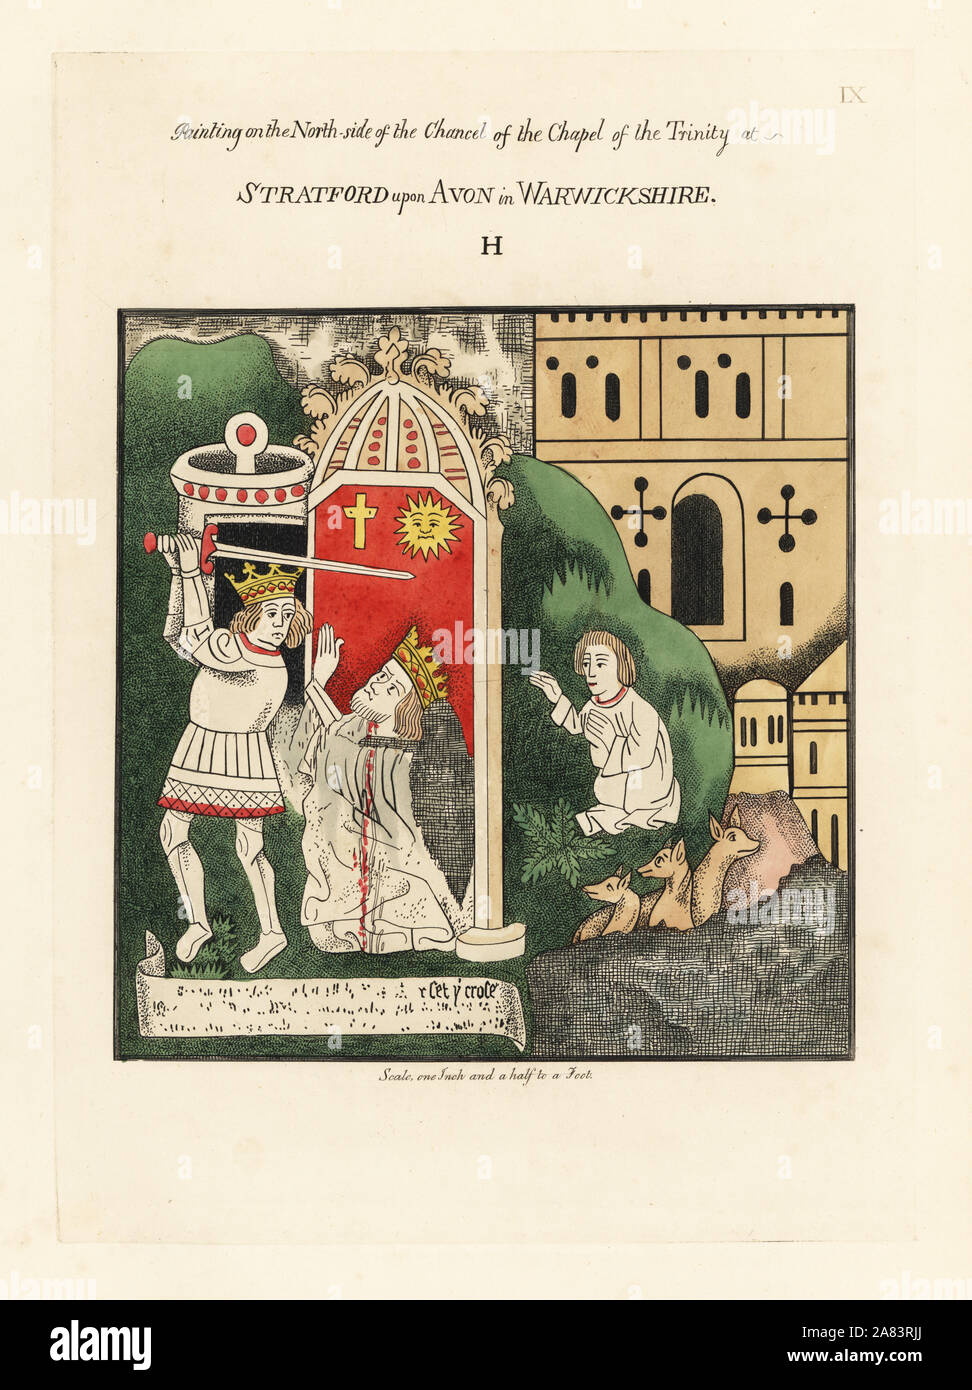 Byzantine Emperor Heraclius decapitating Sassanid Persian King Khosrau II. Handcoloured etching drawn and etched by Thomas Fisher from his Paintings on the Walls of the Chapel of the Trinity, Stratford upon Avon, 1808. Stock Photo